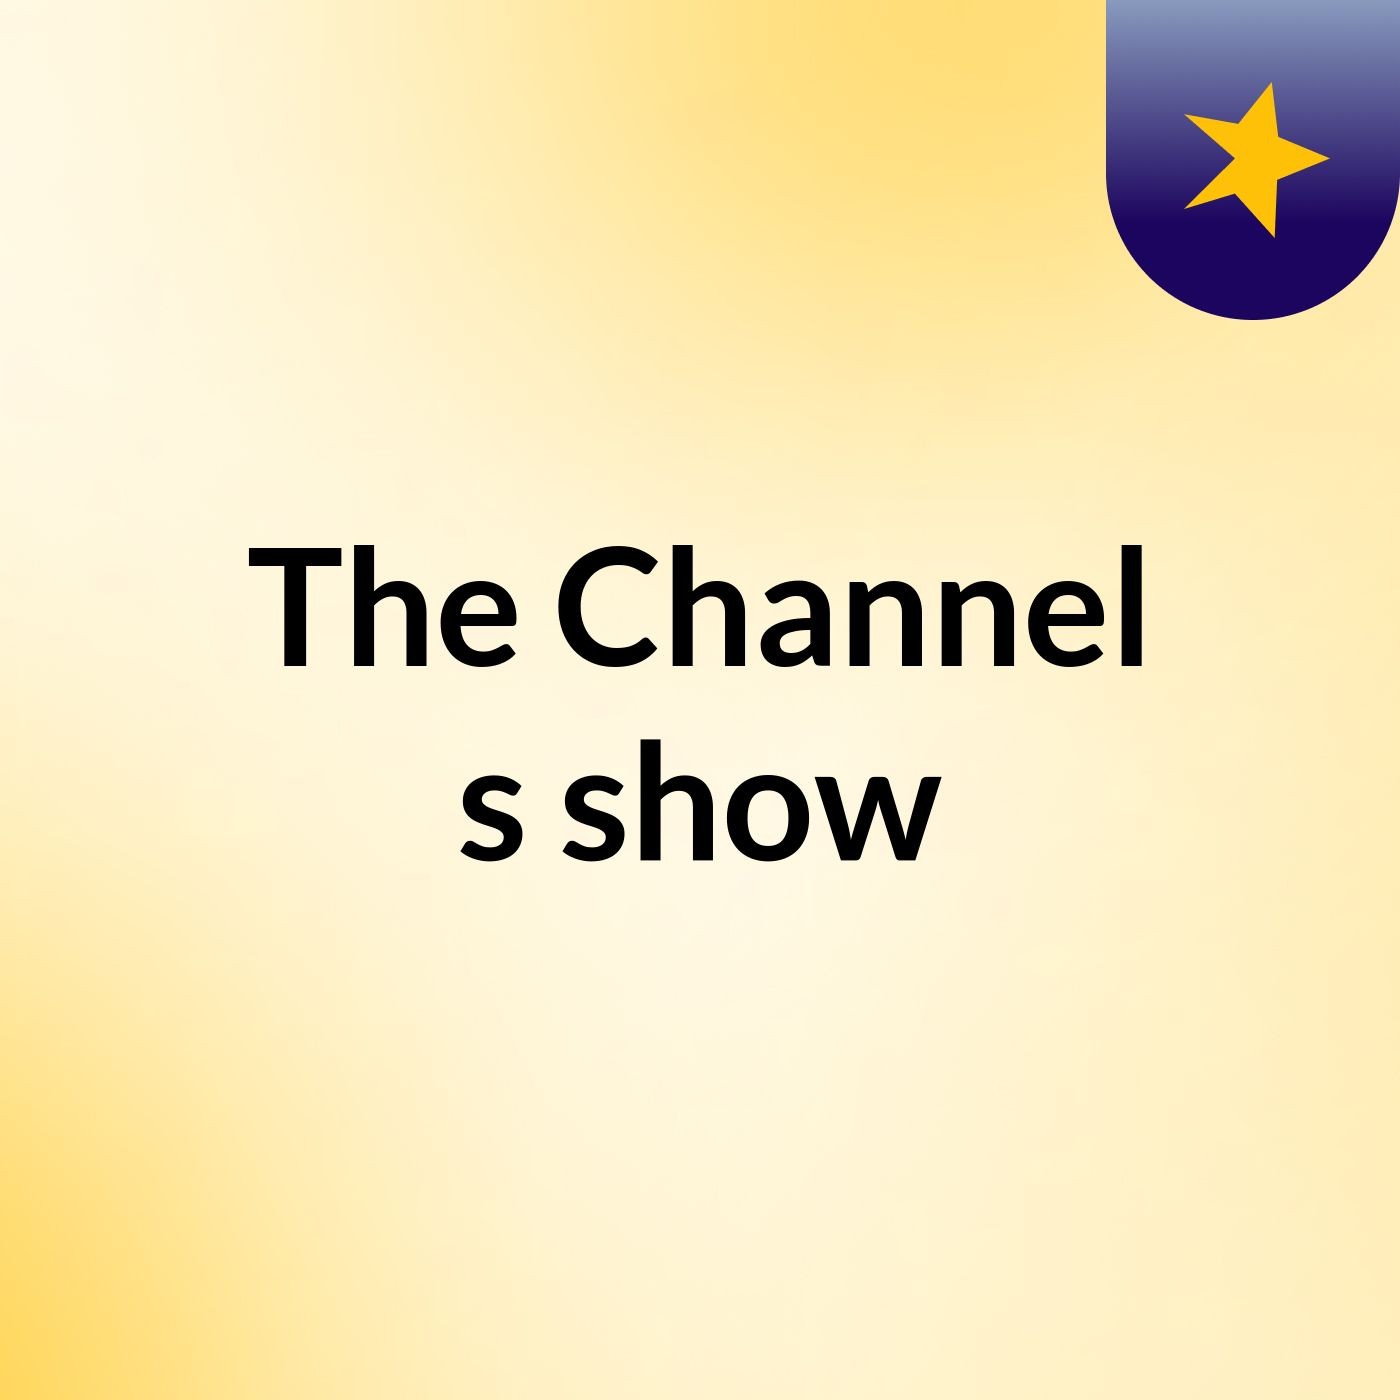 Episode 9 - The Channel's show